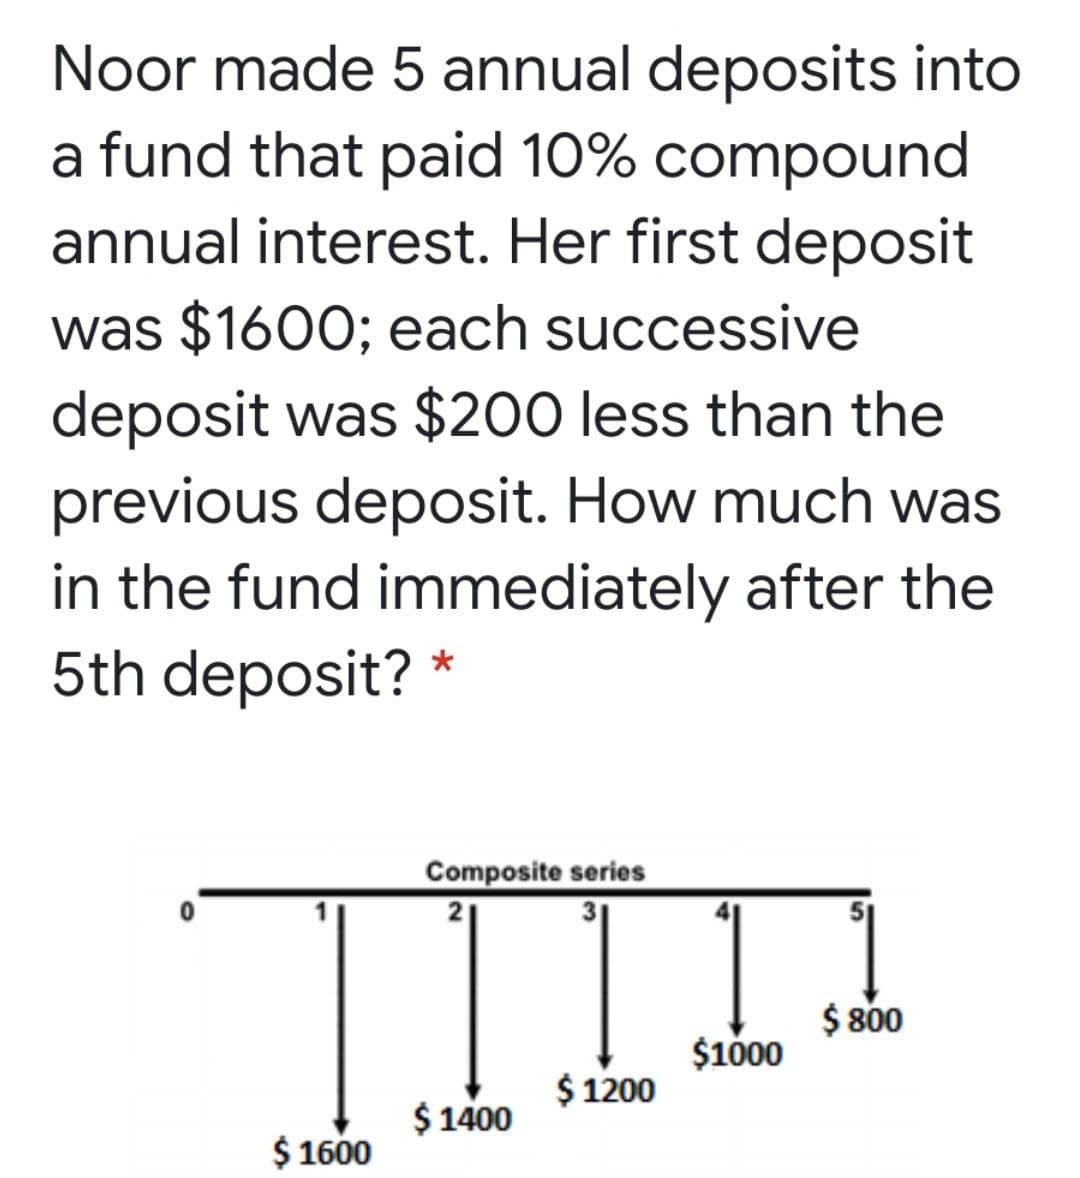 Noor made 5 annual deposits into
a fund that paid 10% compound
annual interest. Her first deposit
was $1600; each successive
deposit was $200 less than the
previous deposit. How much was
in the fund immediately after the
5th deposit? *
Composite series
$ 800
$1000
$ 1200
$ 1400
$ 1600
